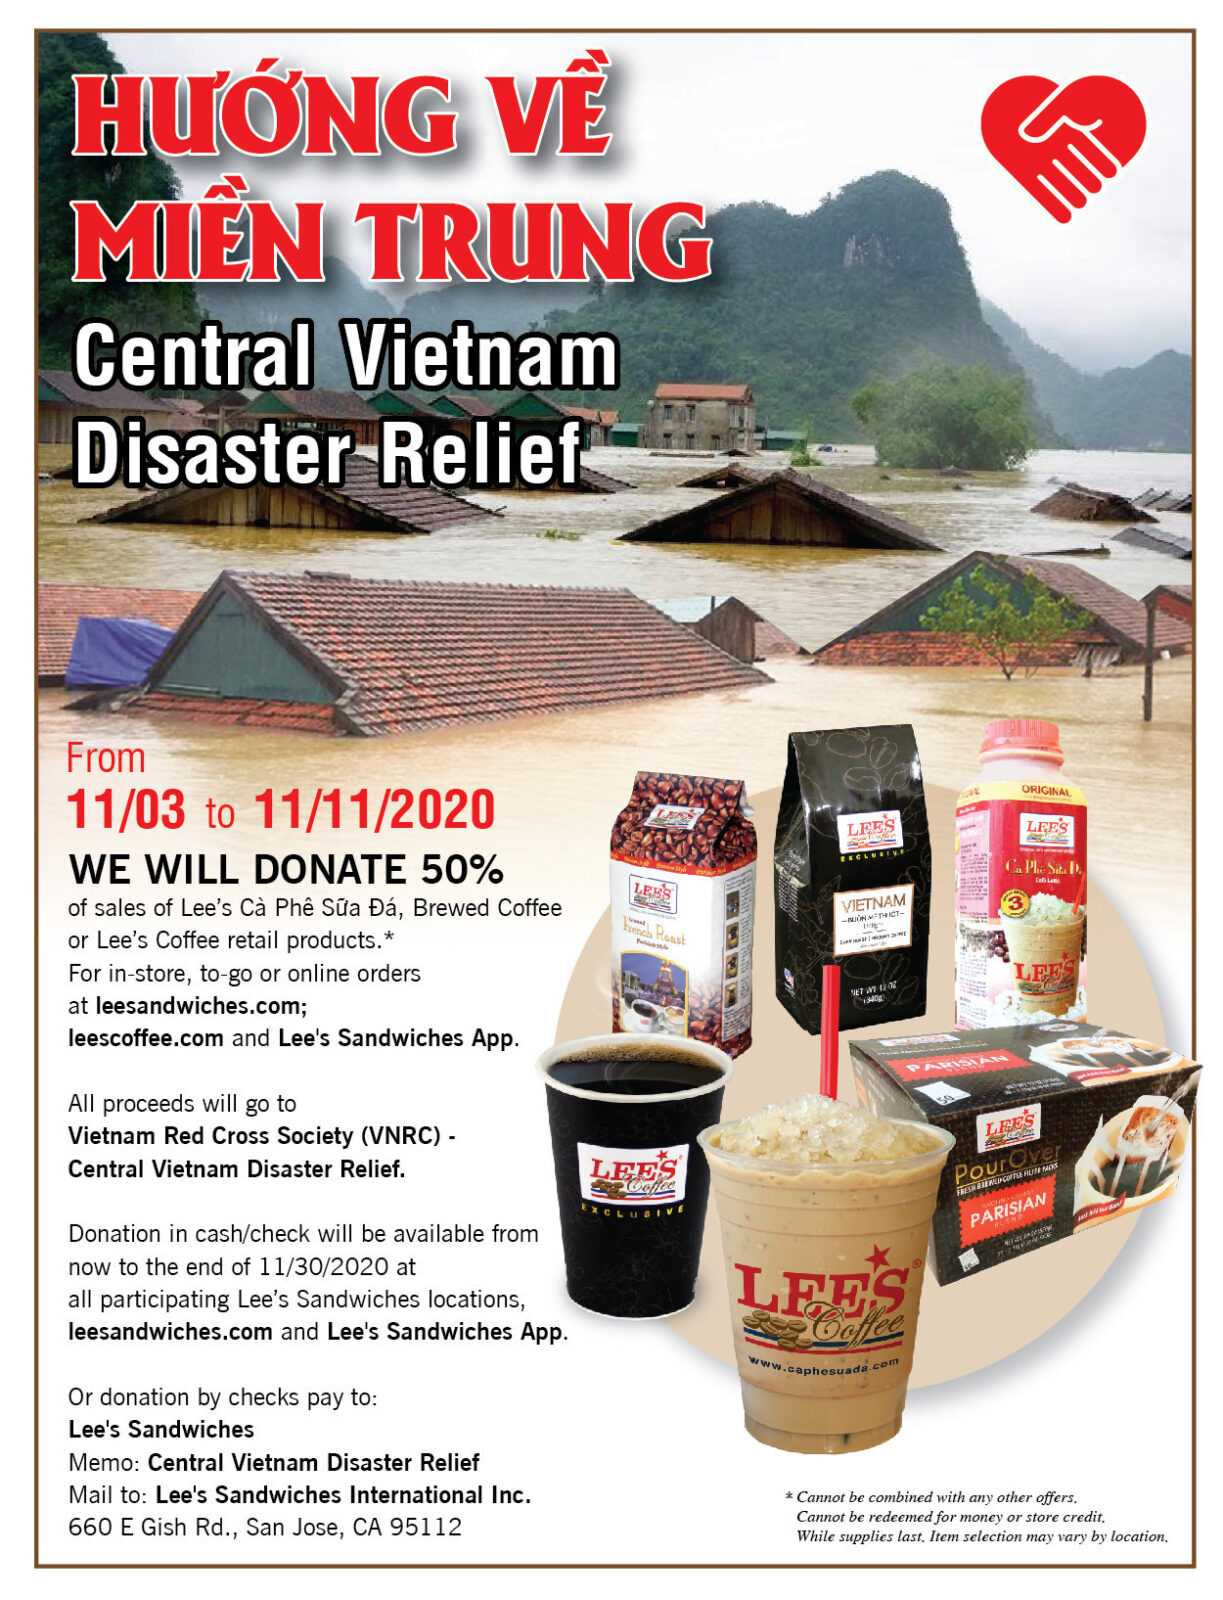 Lee's Sandwiches to donate 50% of coffee sales to Vietnam Disaster Relief